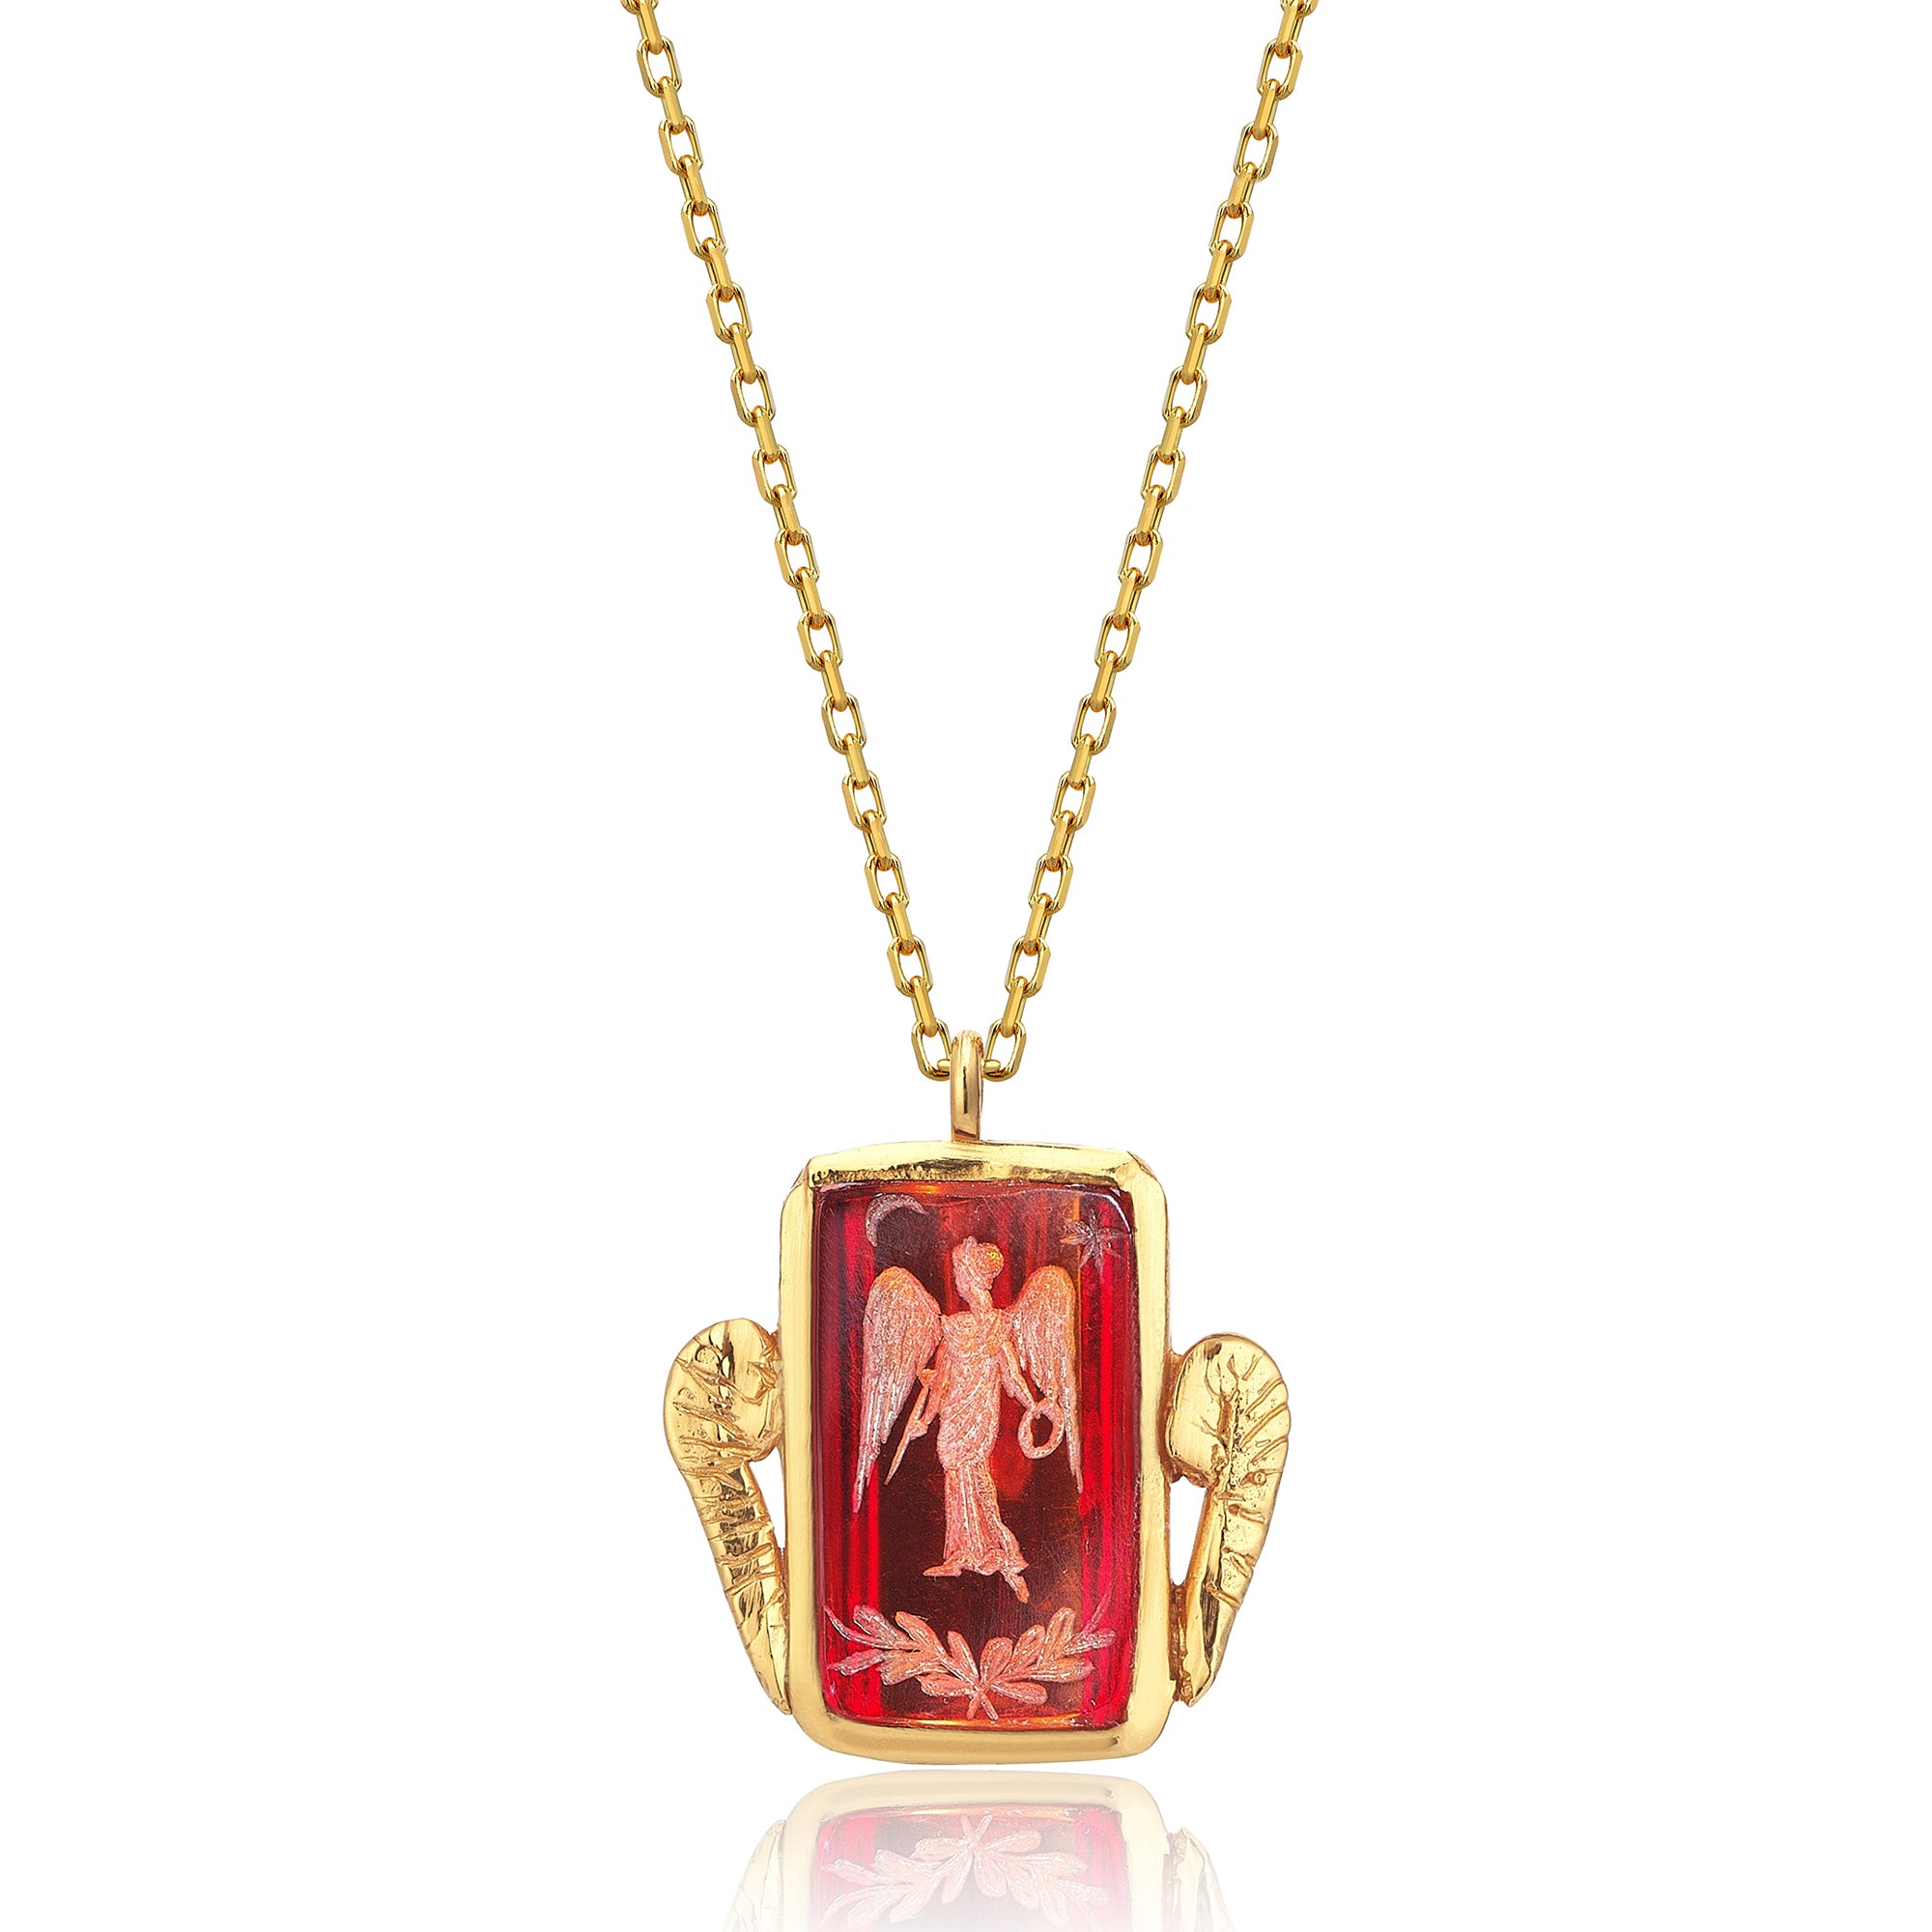 THE RED ANGEL NECKLACE